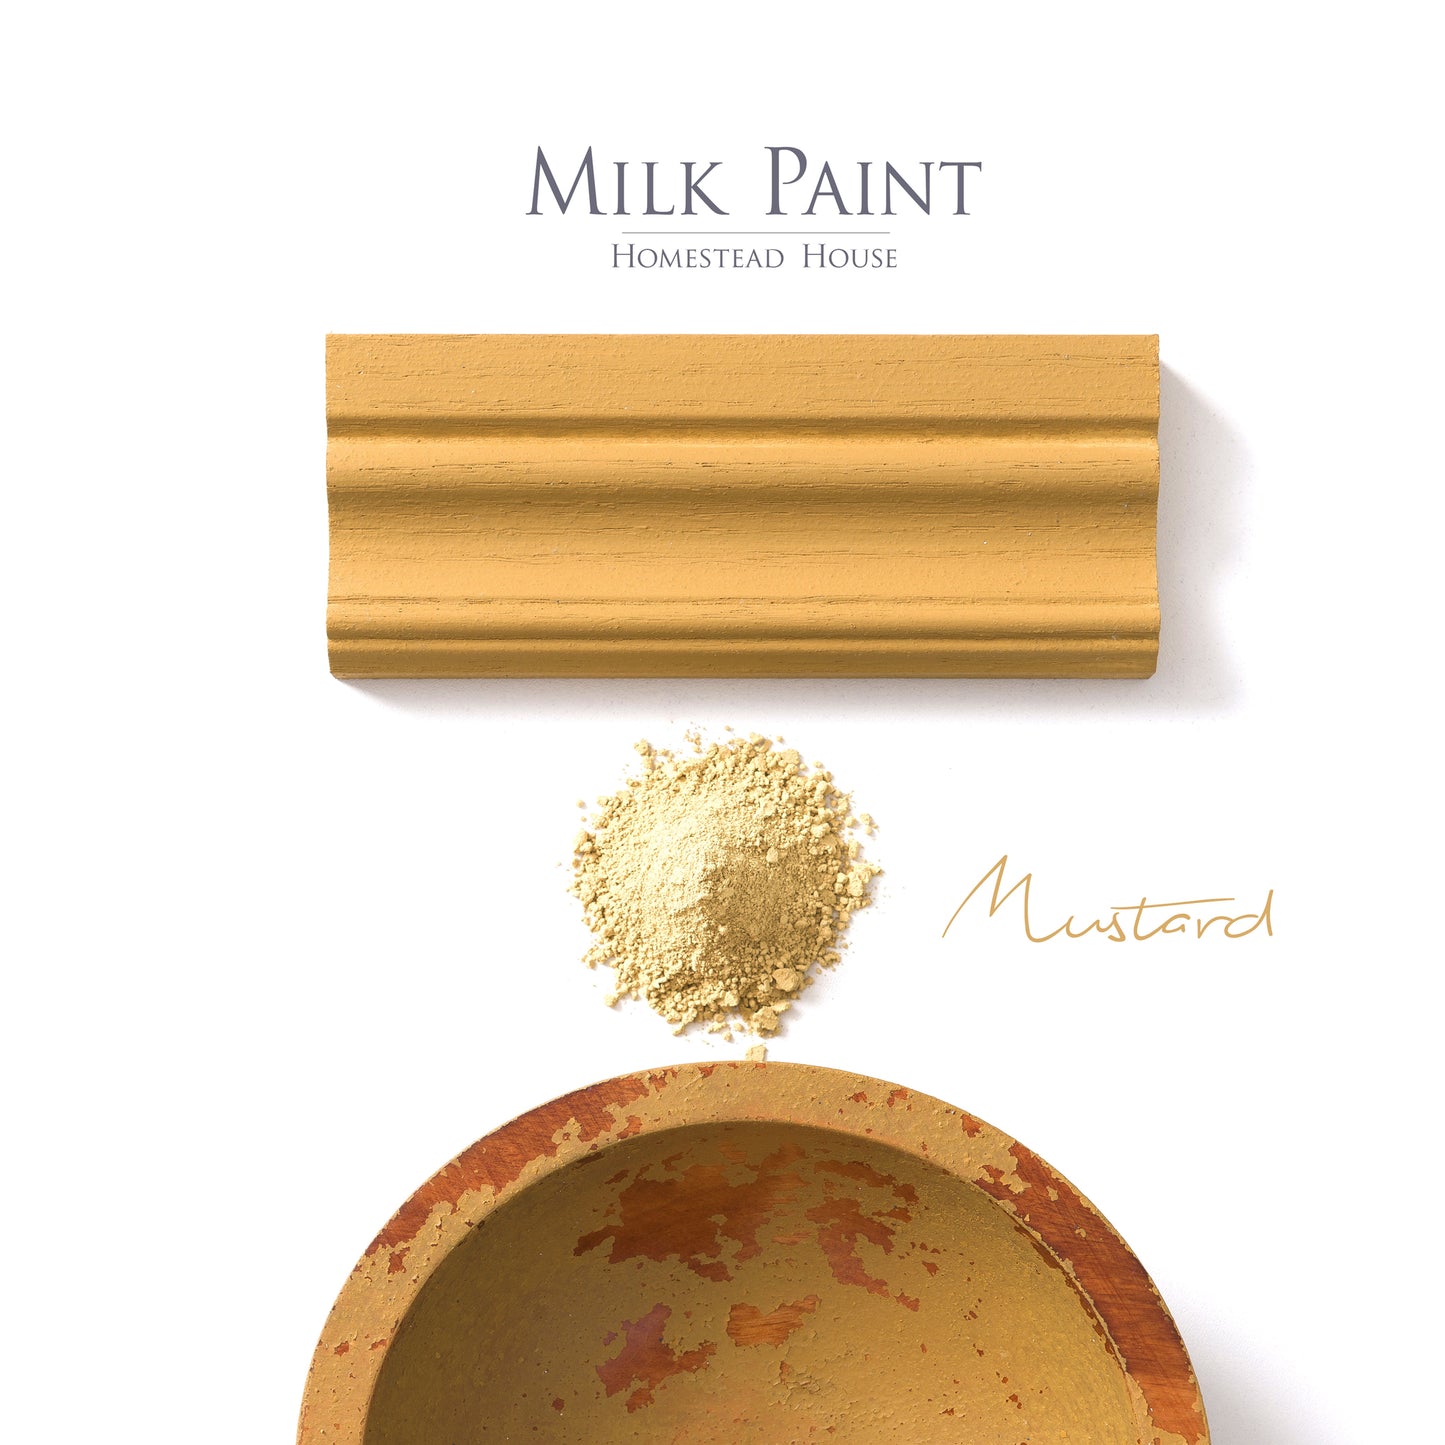 Milk Paint from Homestead House in Mustard, a traditional rich dark yellow with an muted orange hue.  |  homesteadhouse.ca